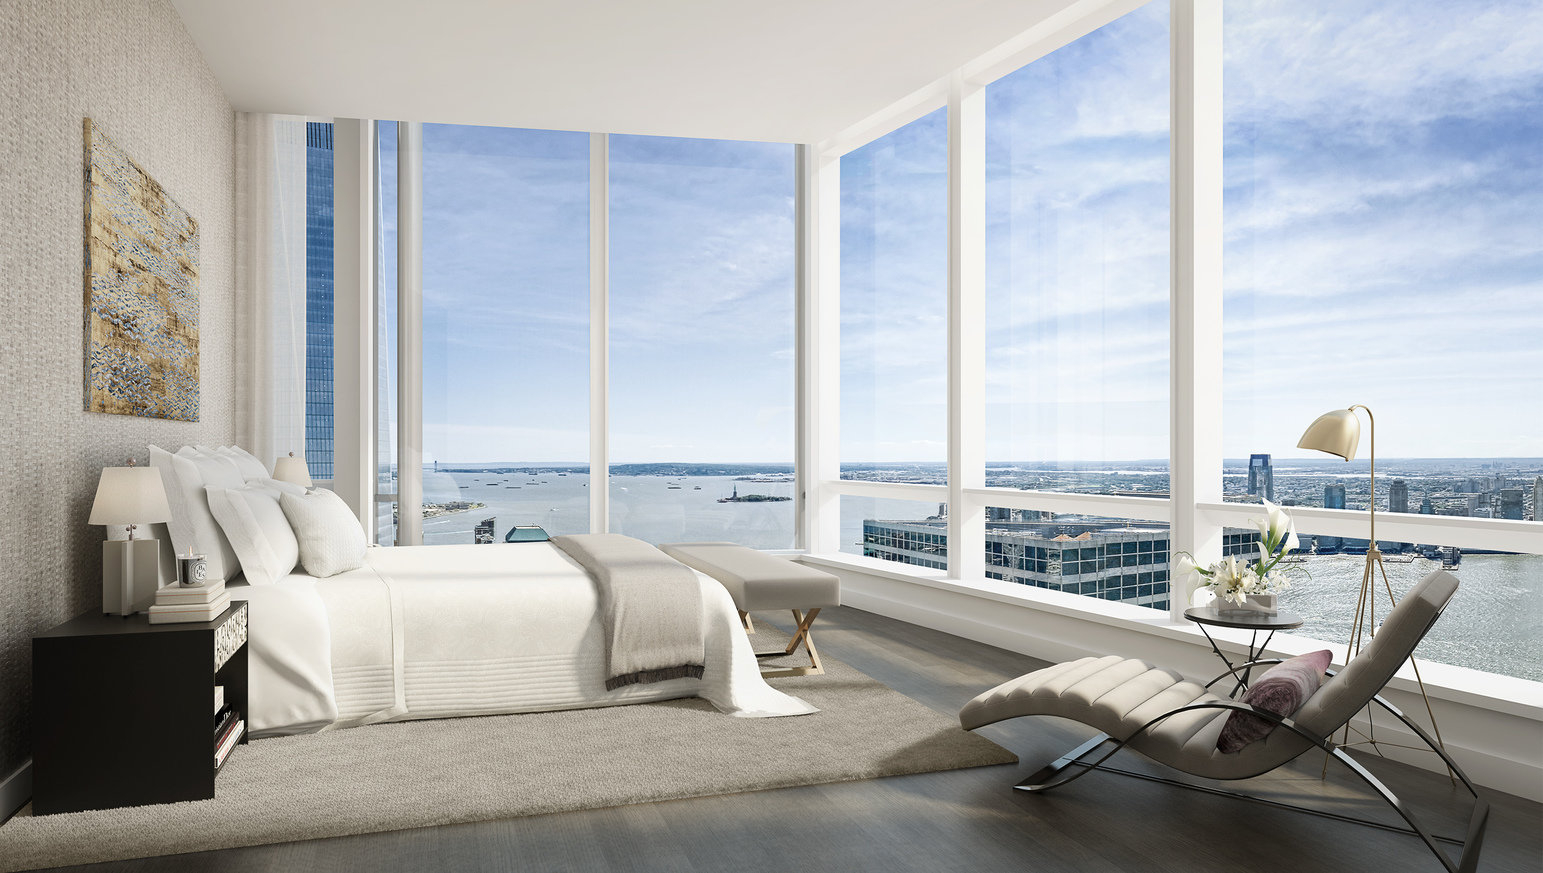 Airy bedroom with full-height windows and views of the Hudson River, grey wood floor, neutral rug and bedding, lounge chair.